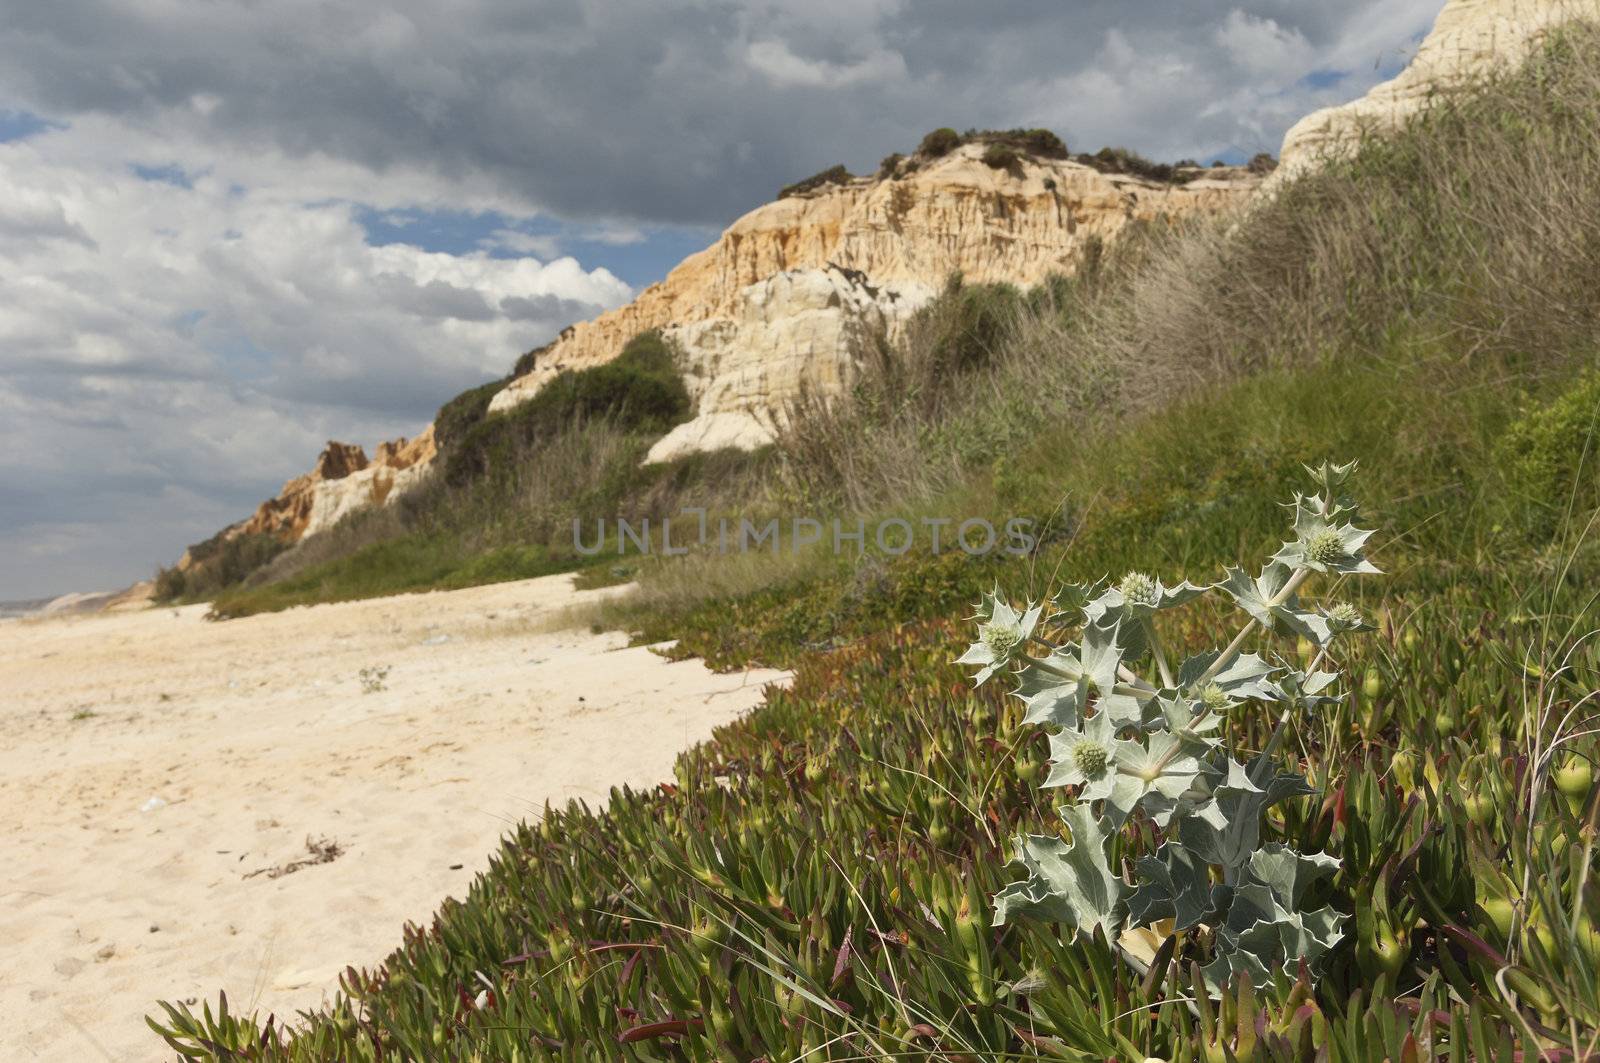 Sea holly - Eryngium maritimum - surrounded by invasive ice plant, dunes of Gale beach, Comporta, Portugal